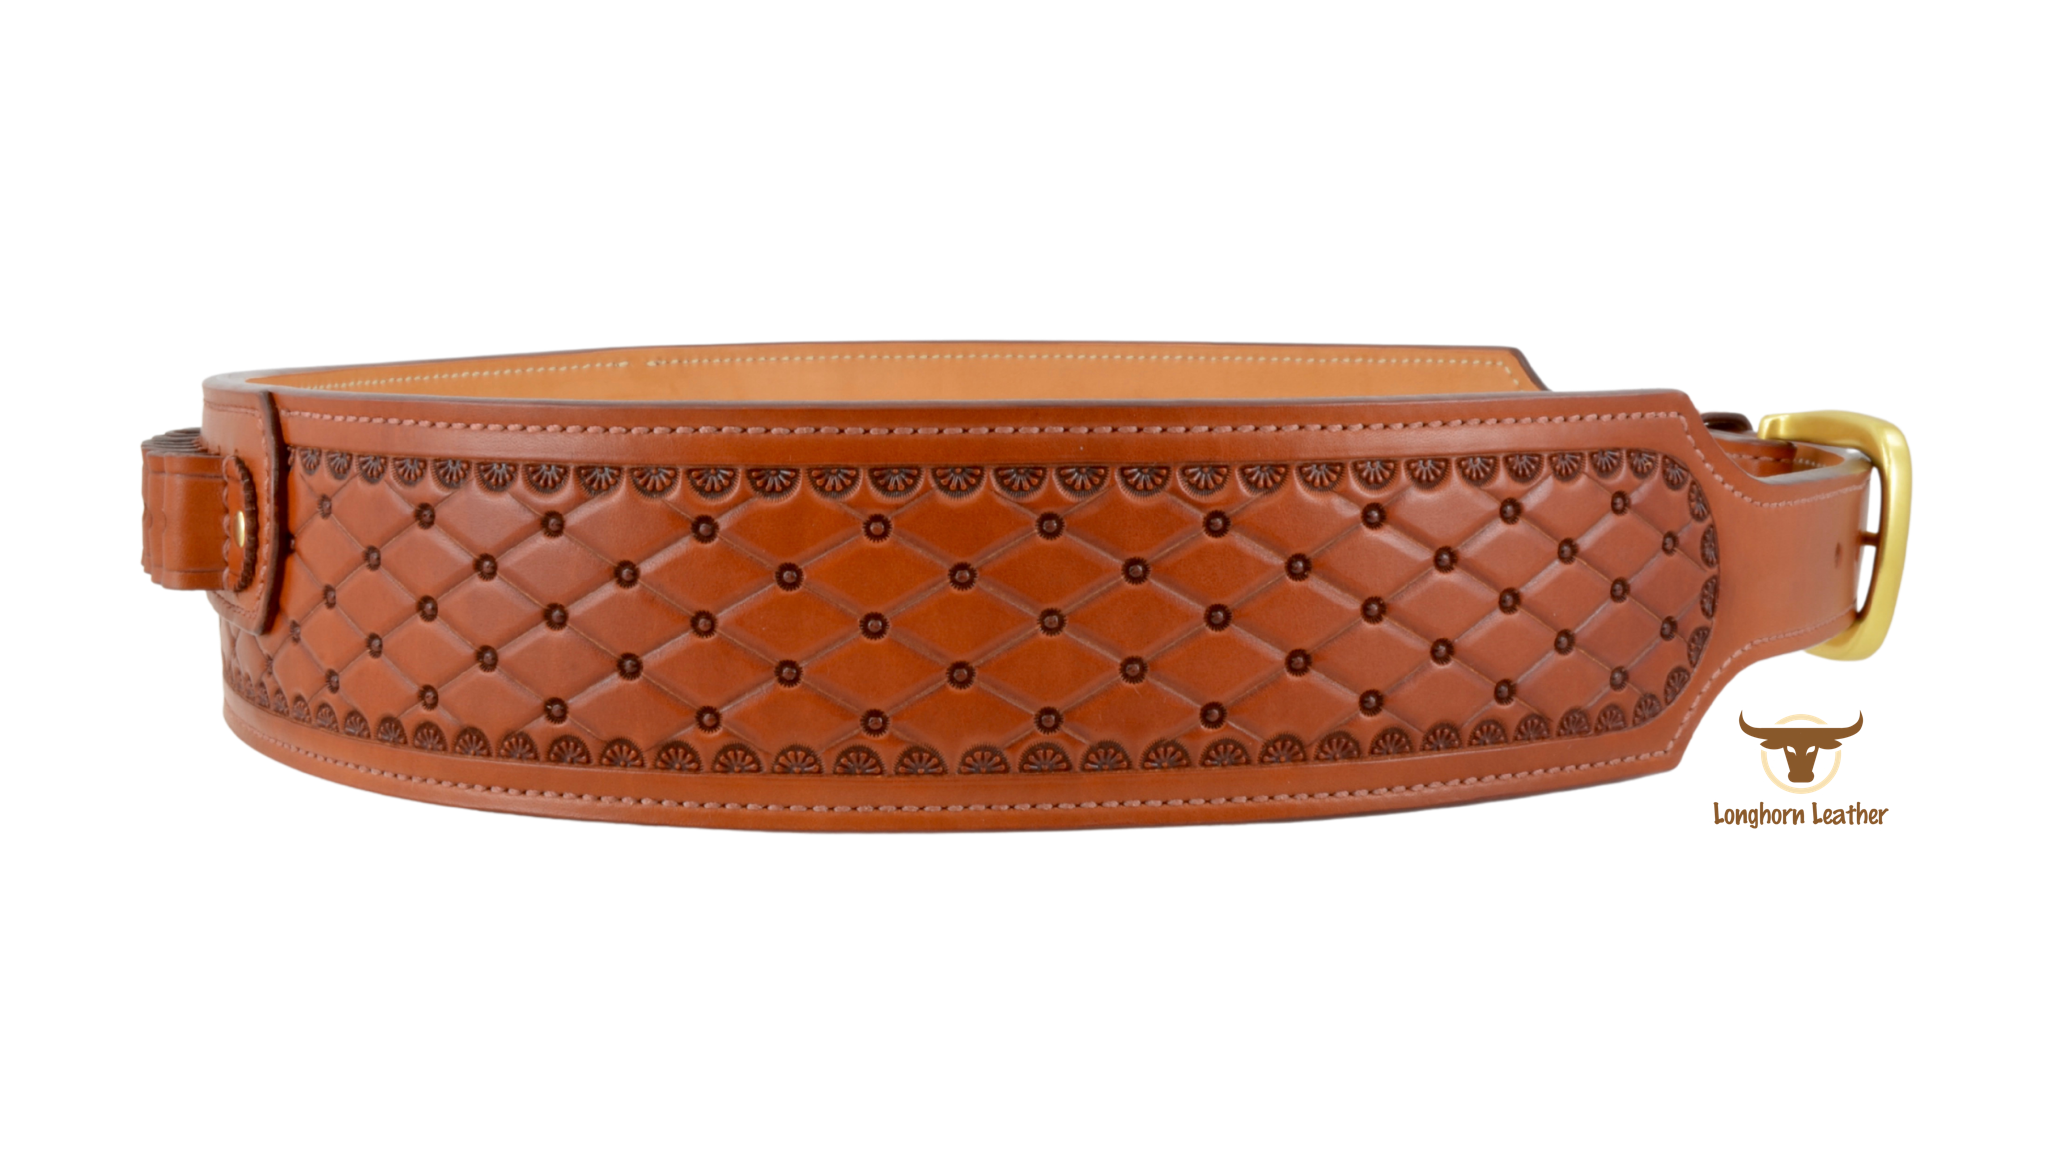 Custom leather cartridge belt featuring the "San Carlos" design.  Individually handcrafted at Longhorn Leather AZ.